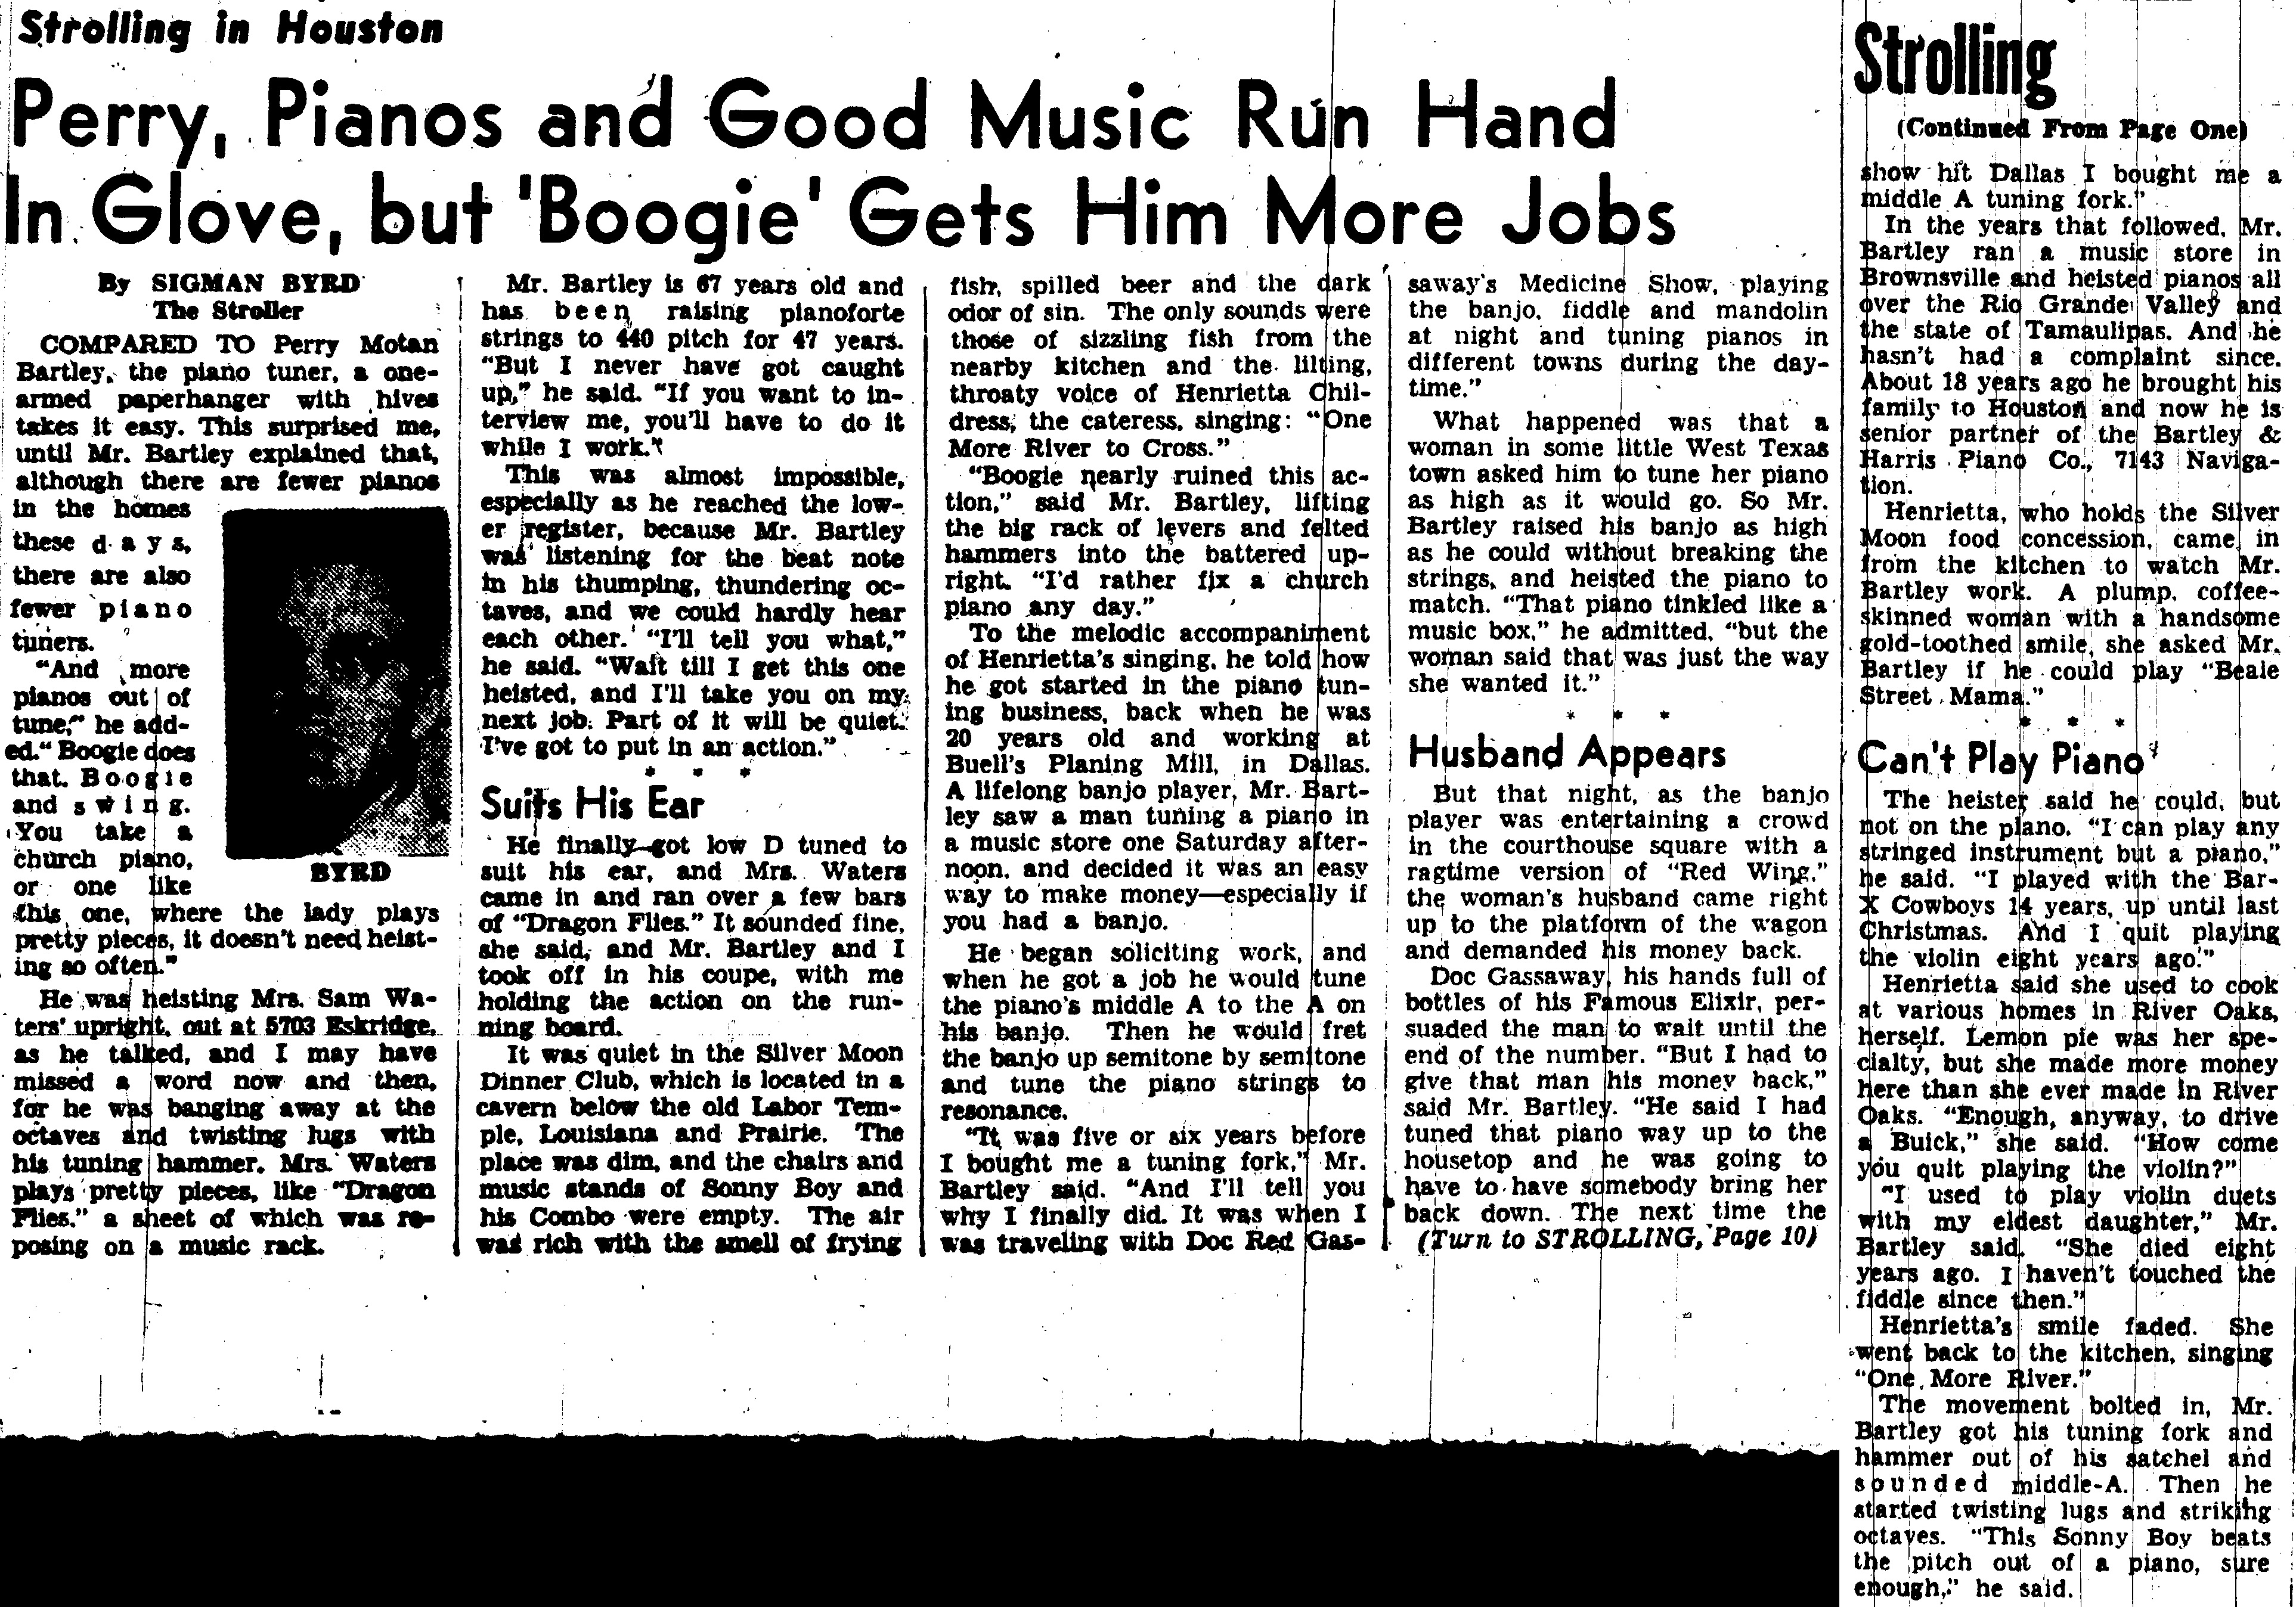 1947-11-22 - Byrd, Sig - Perry, Pianos and Good Music Run Hand in Glove, But 'Boogie' Gets Him More Jobs - Houston Press, [Houston] - Saturday, November 22, 1947, Pages 1 & 10